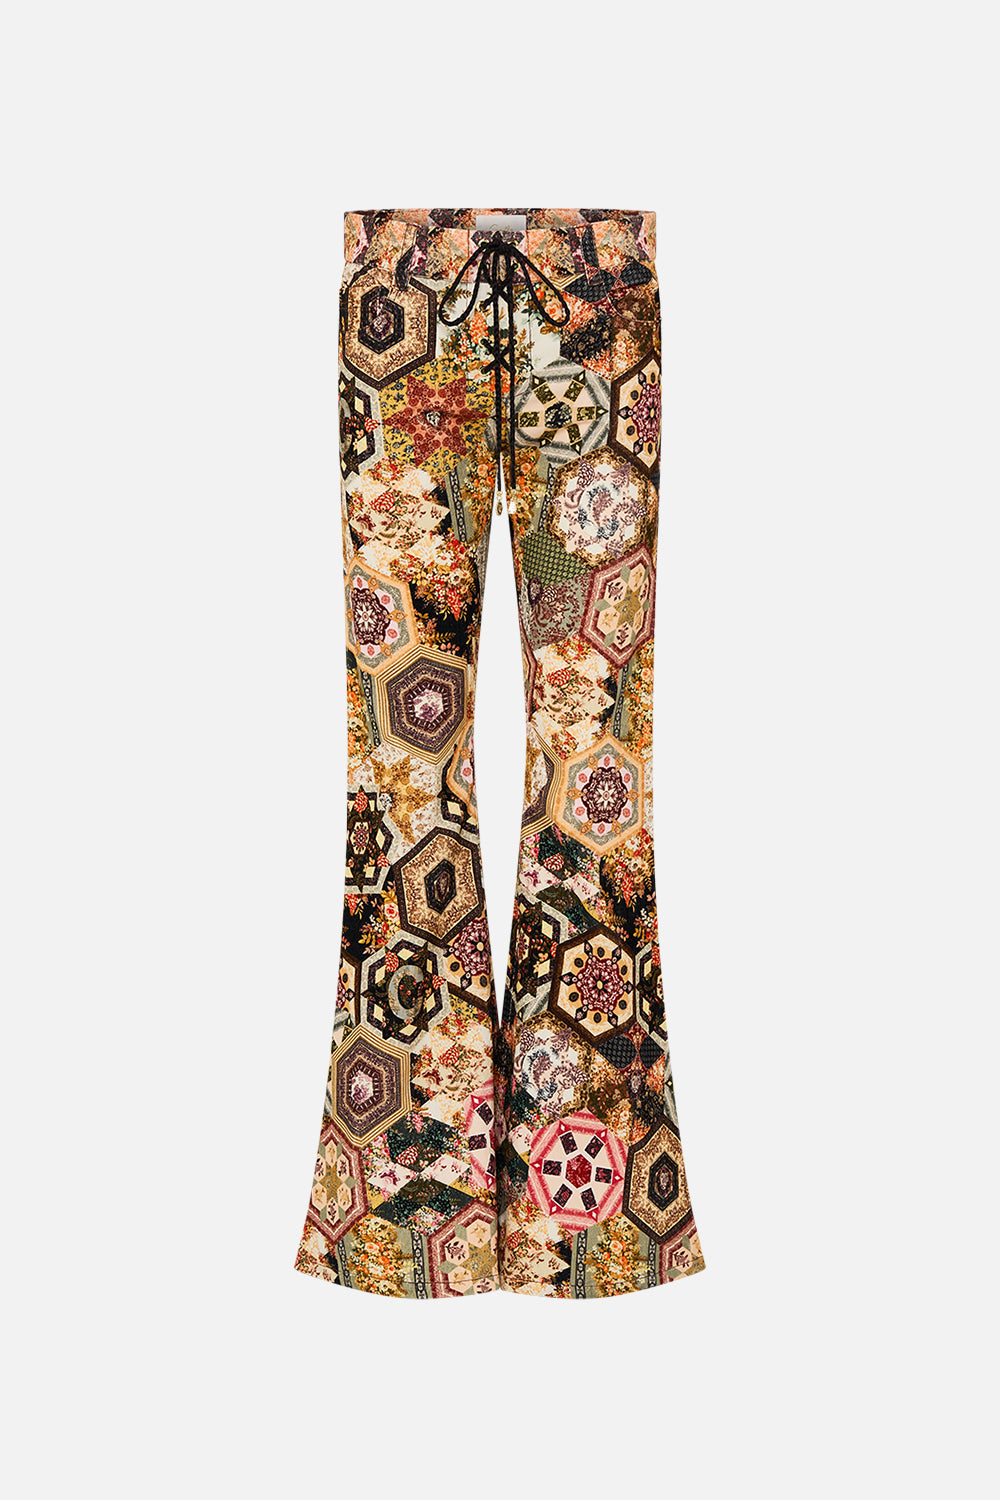 CAMILLA Floral Eyelet Front Pant in Stitched in Time